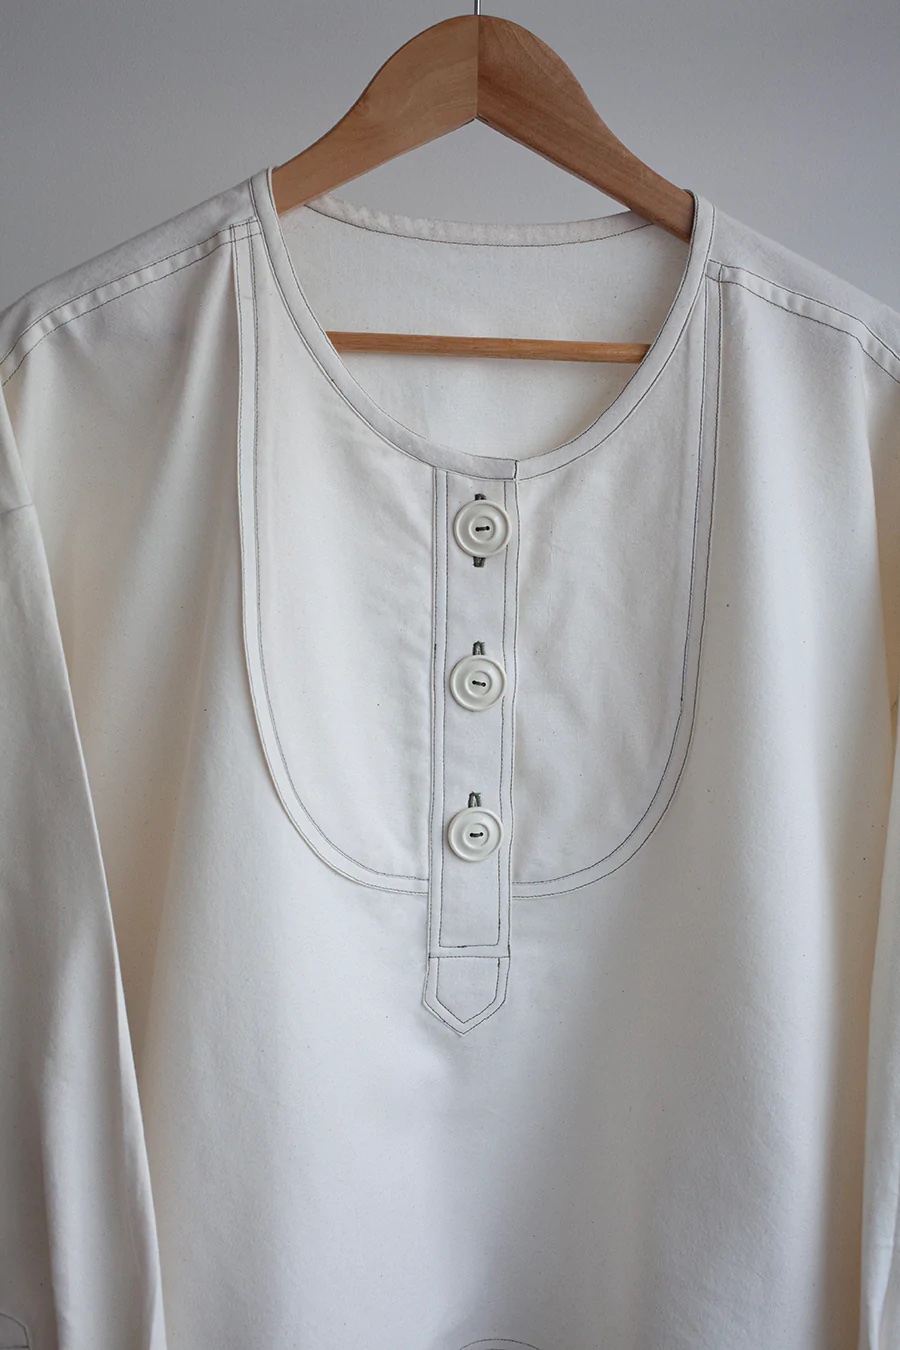 The Modern Sewing Co. French Smock - The Fold Line